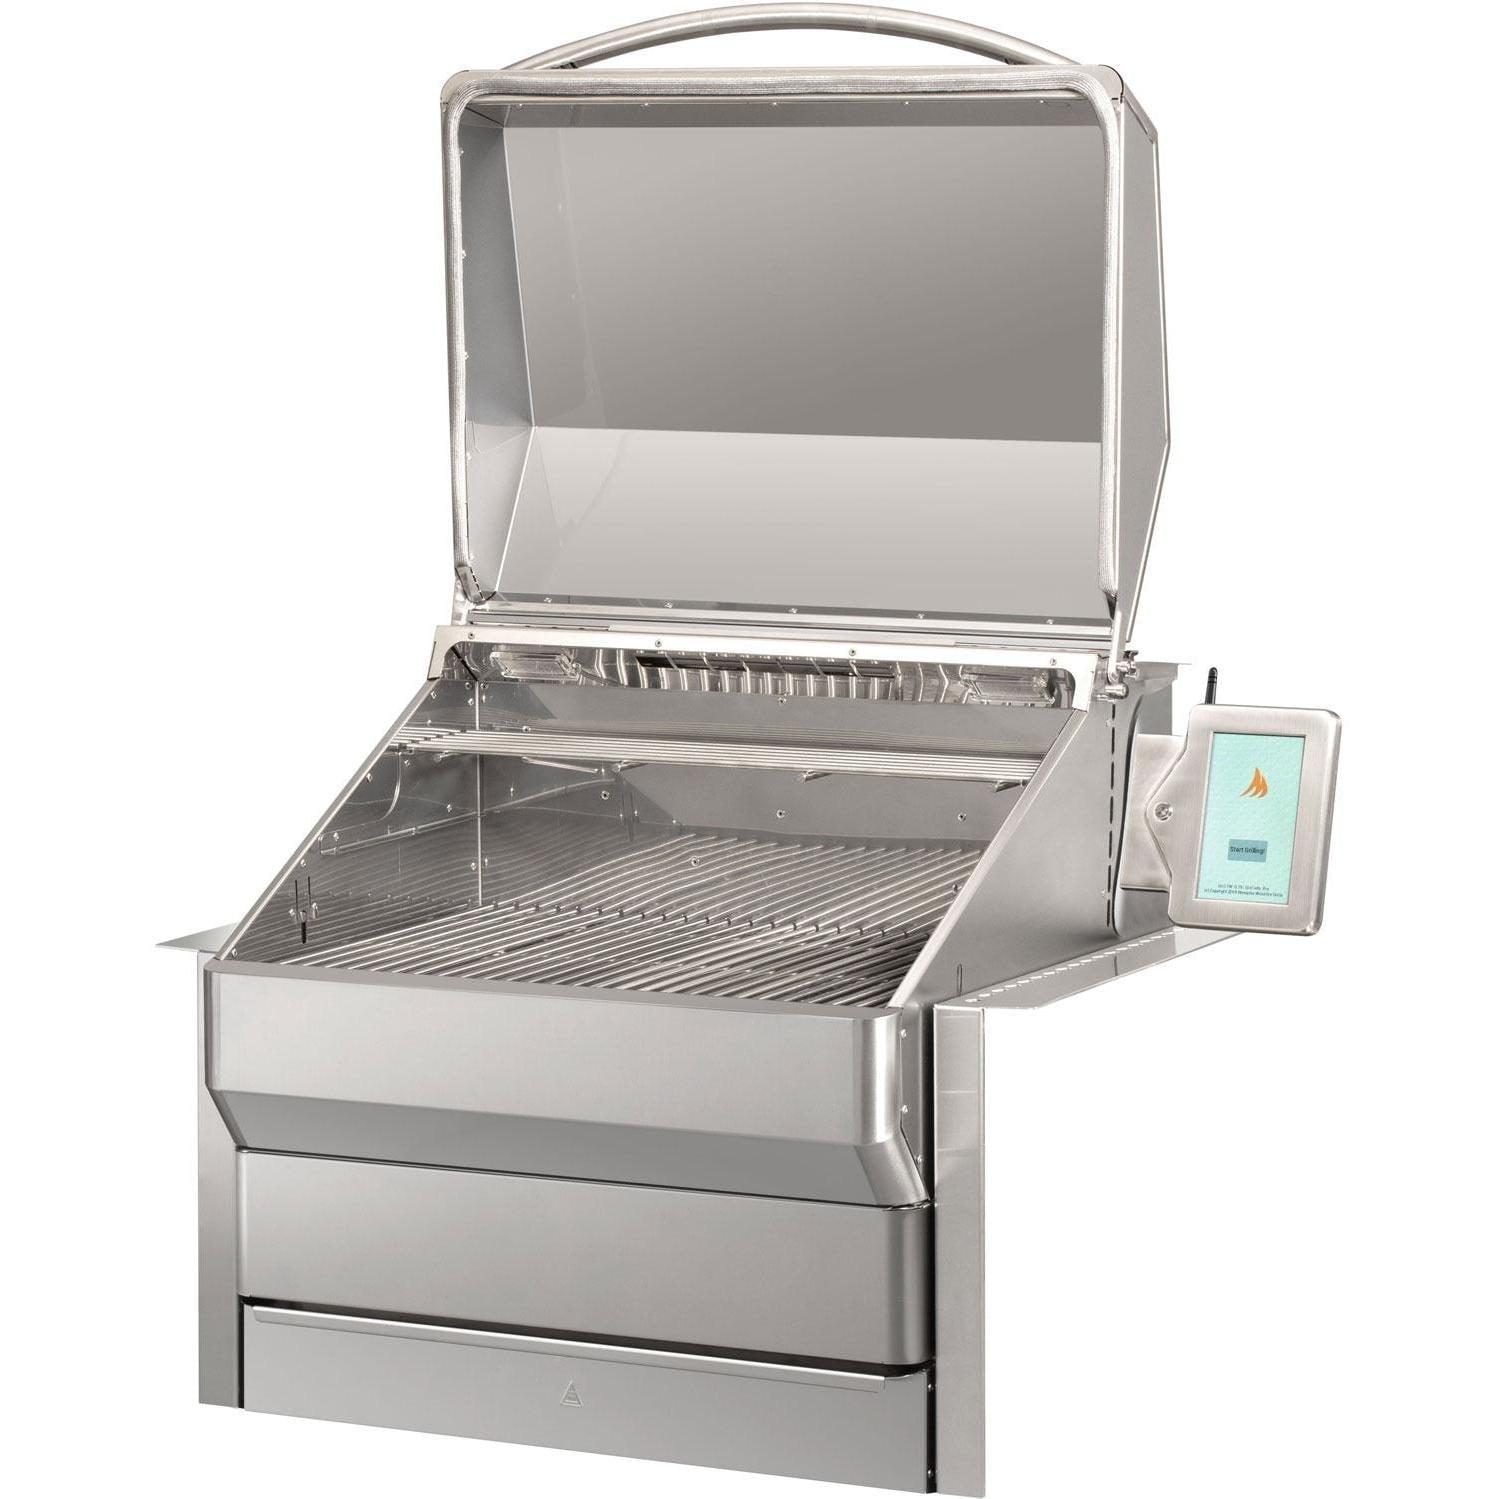 Memphis Grills - Pro ITC3 Wi-Fi Monitored 28-Inch 304 Stainless Steel Built-In Pellet Grill - VGB0001S